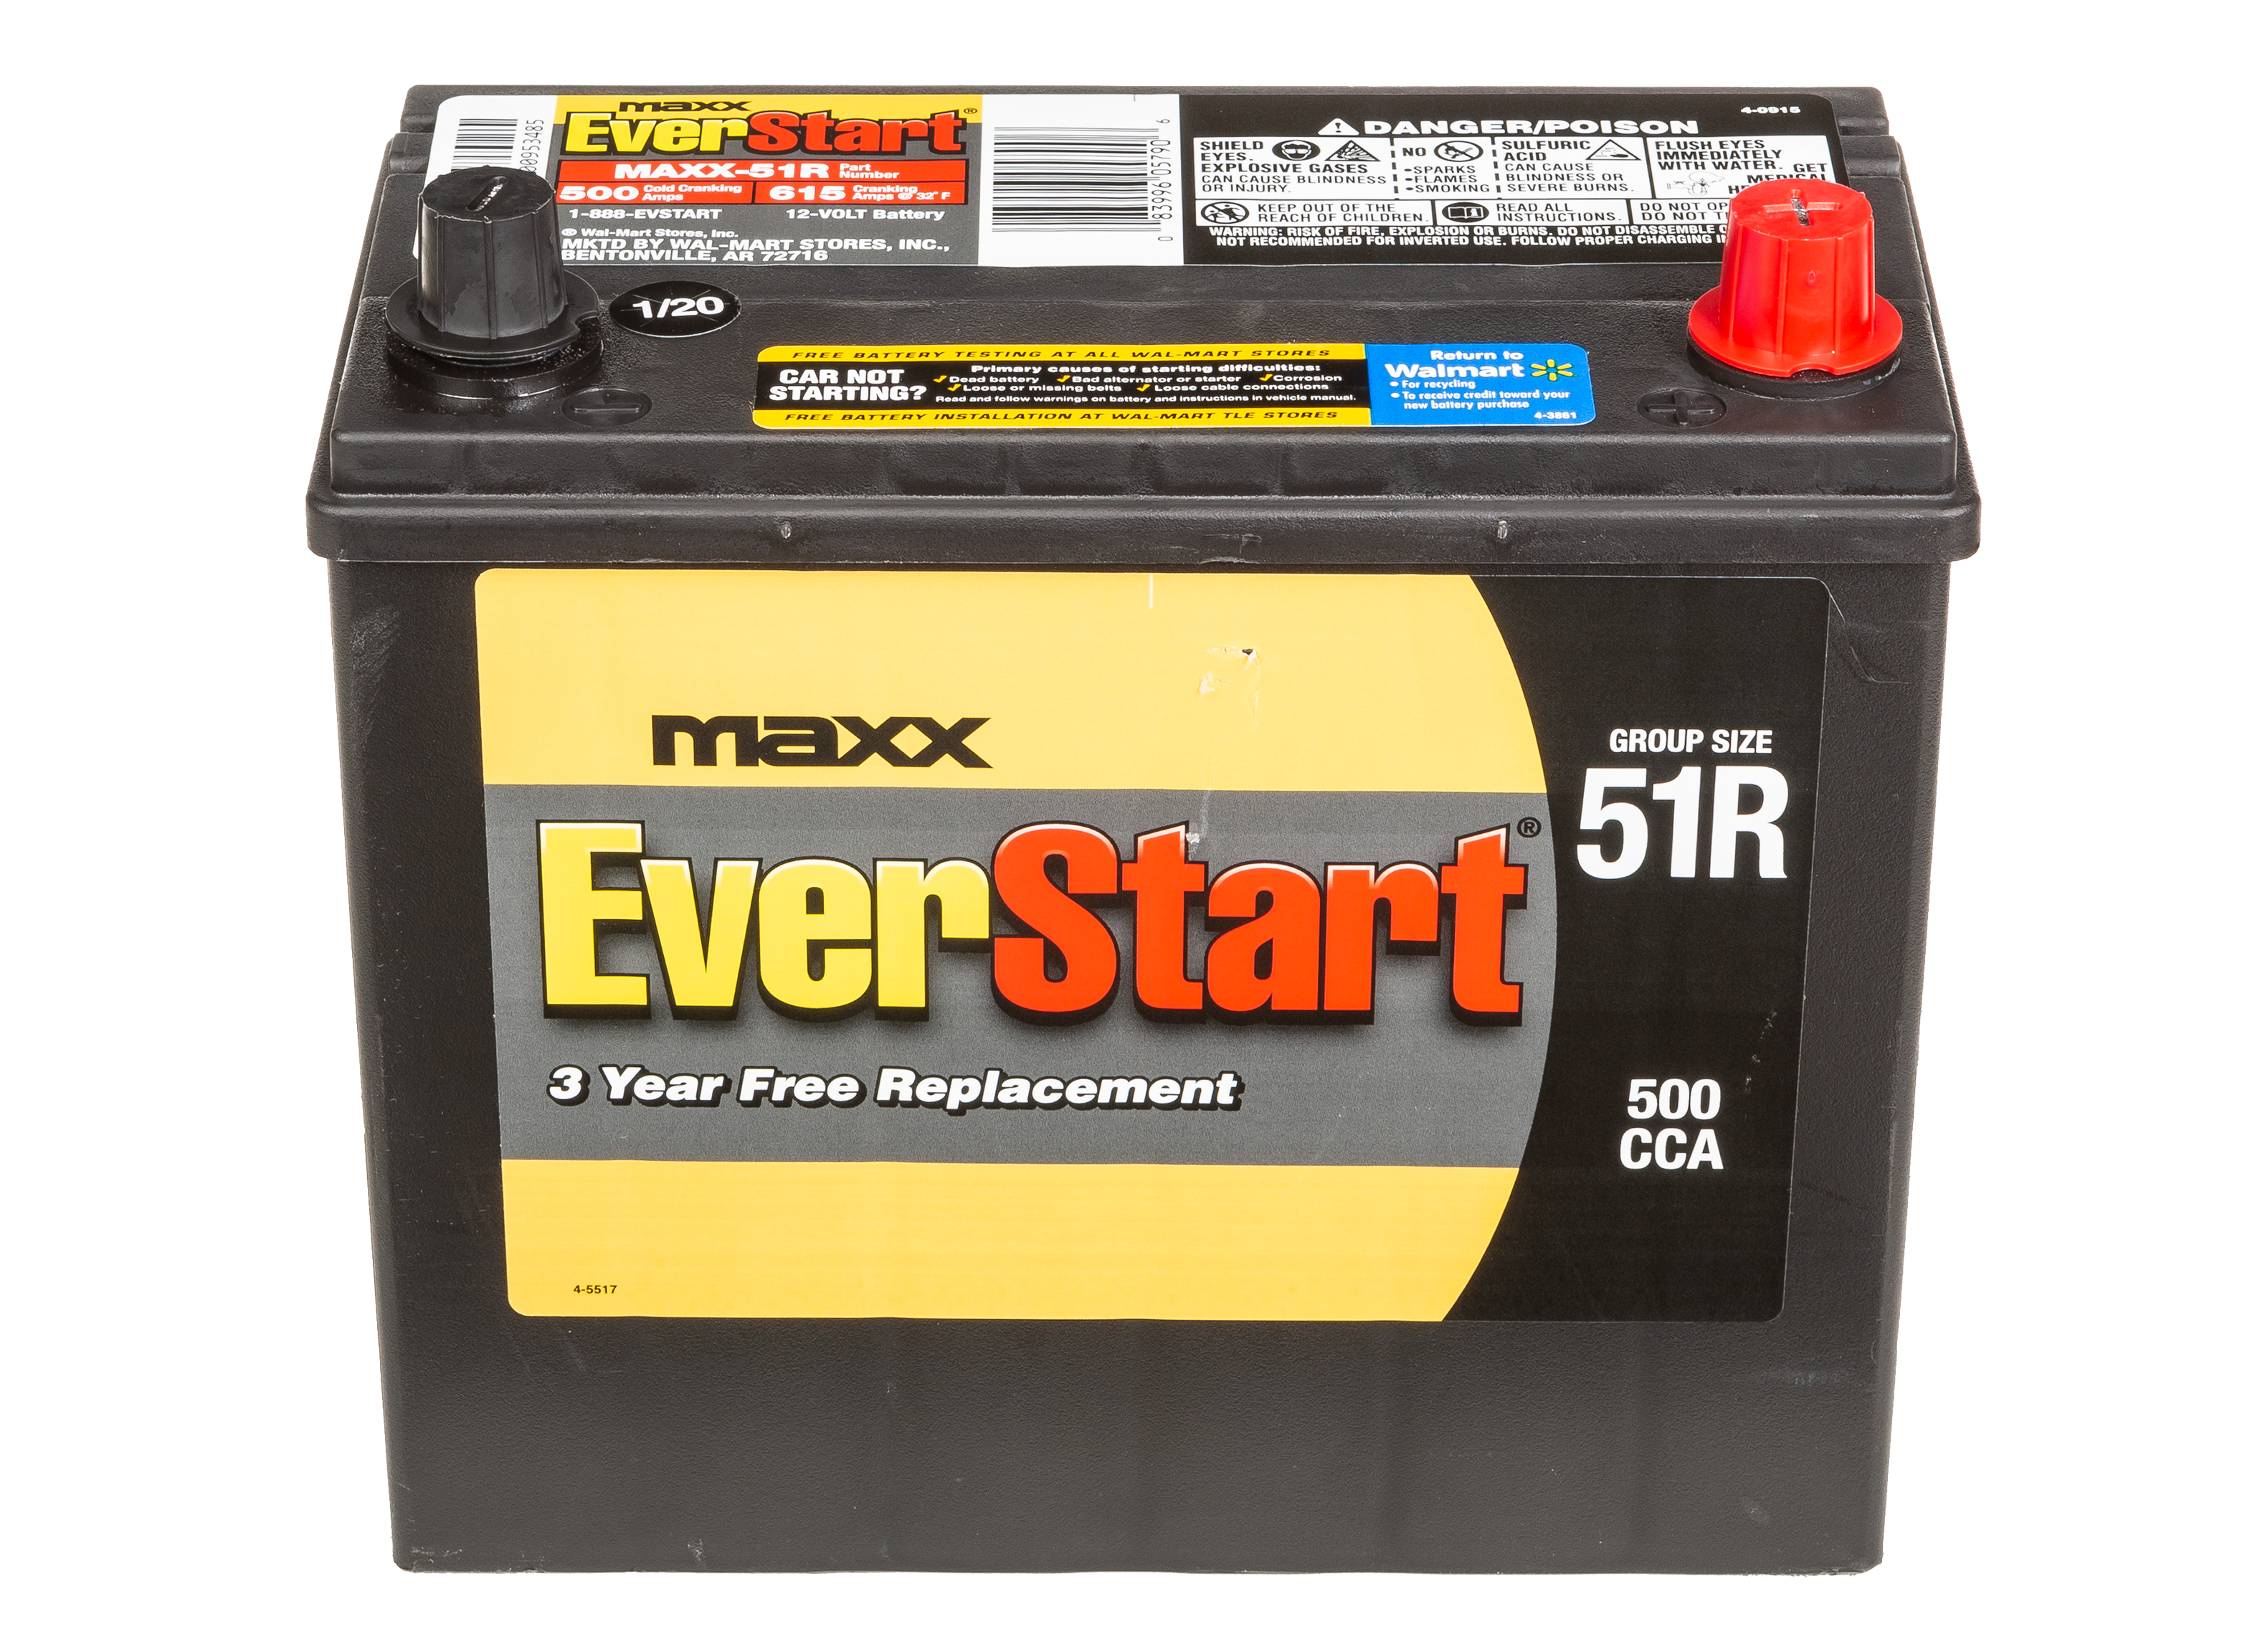 MAXX-51R Car Battery Review - Reports